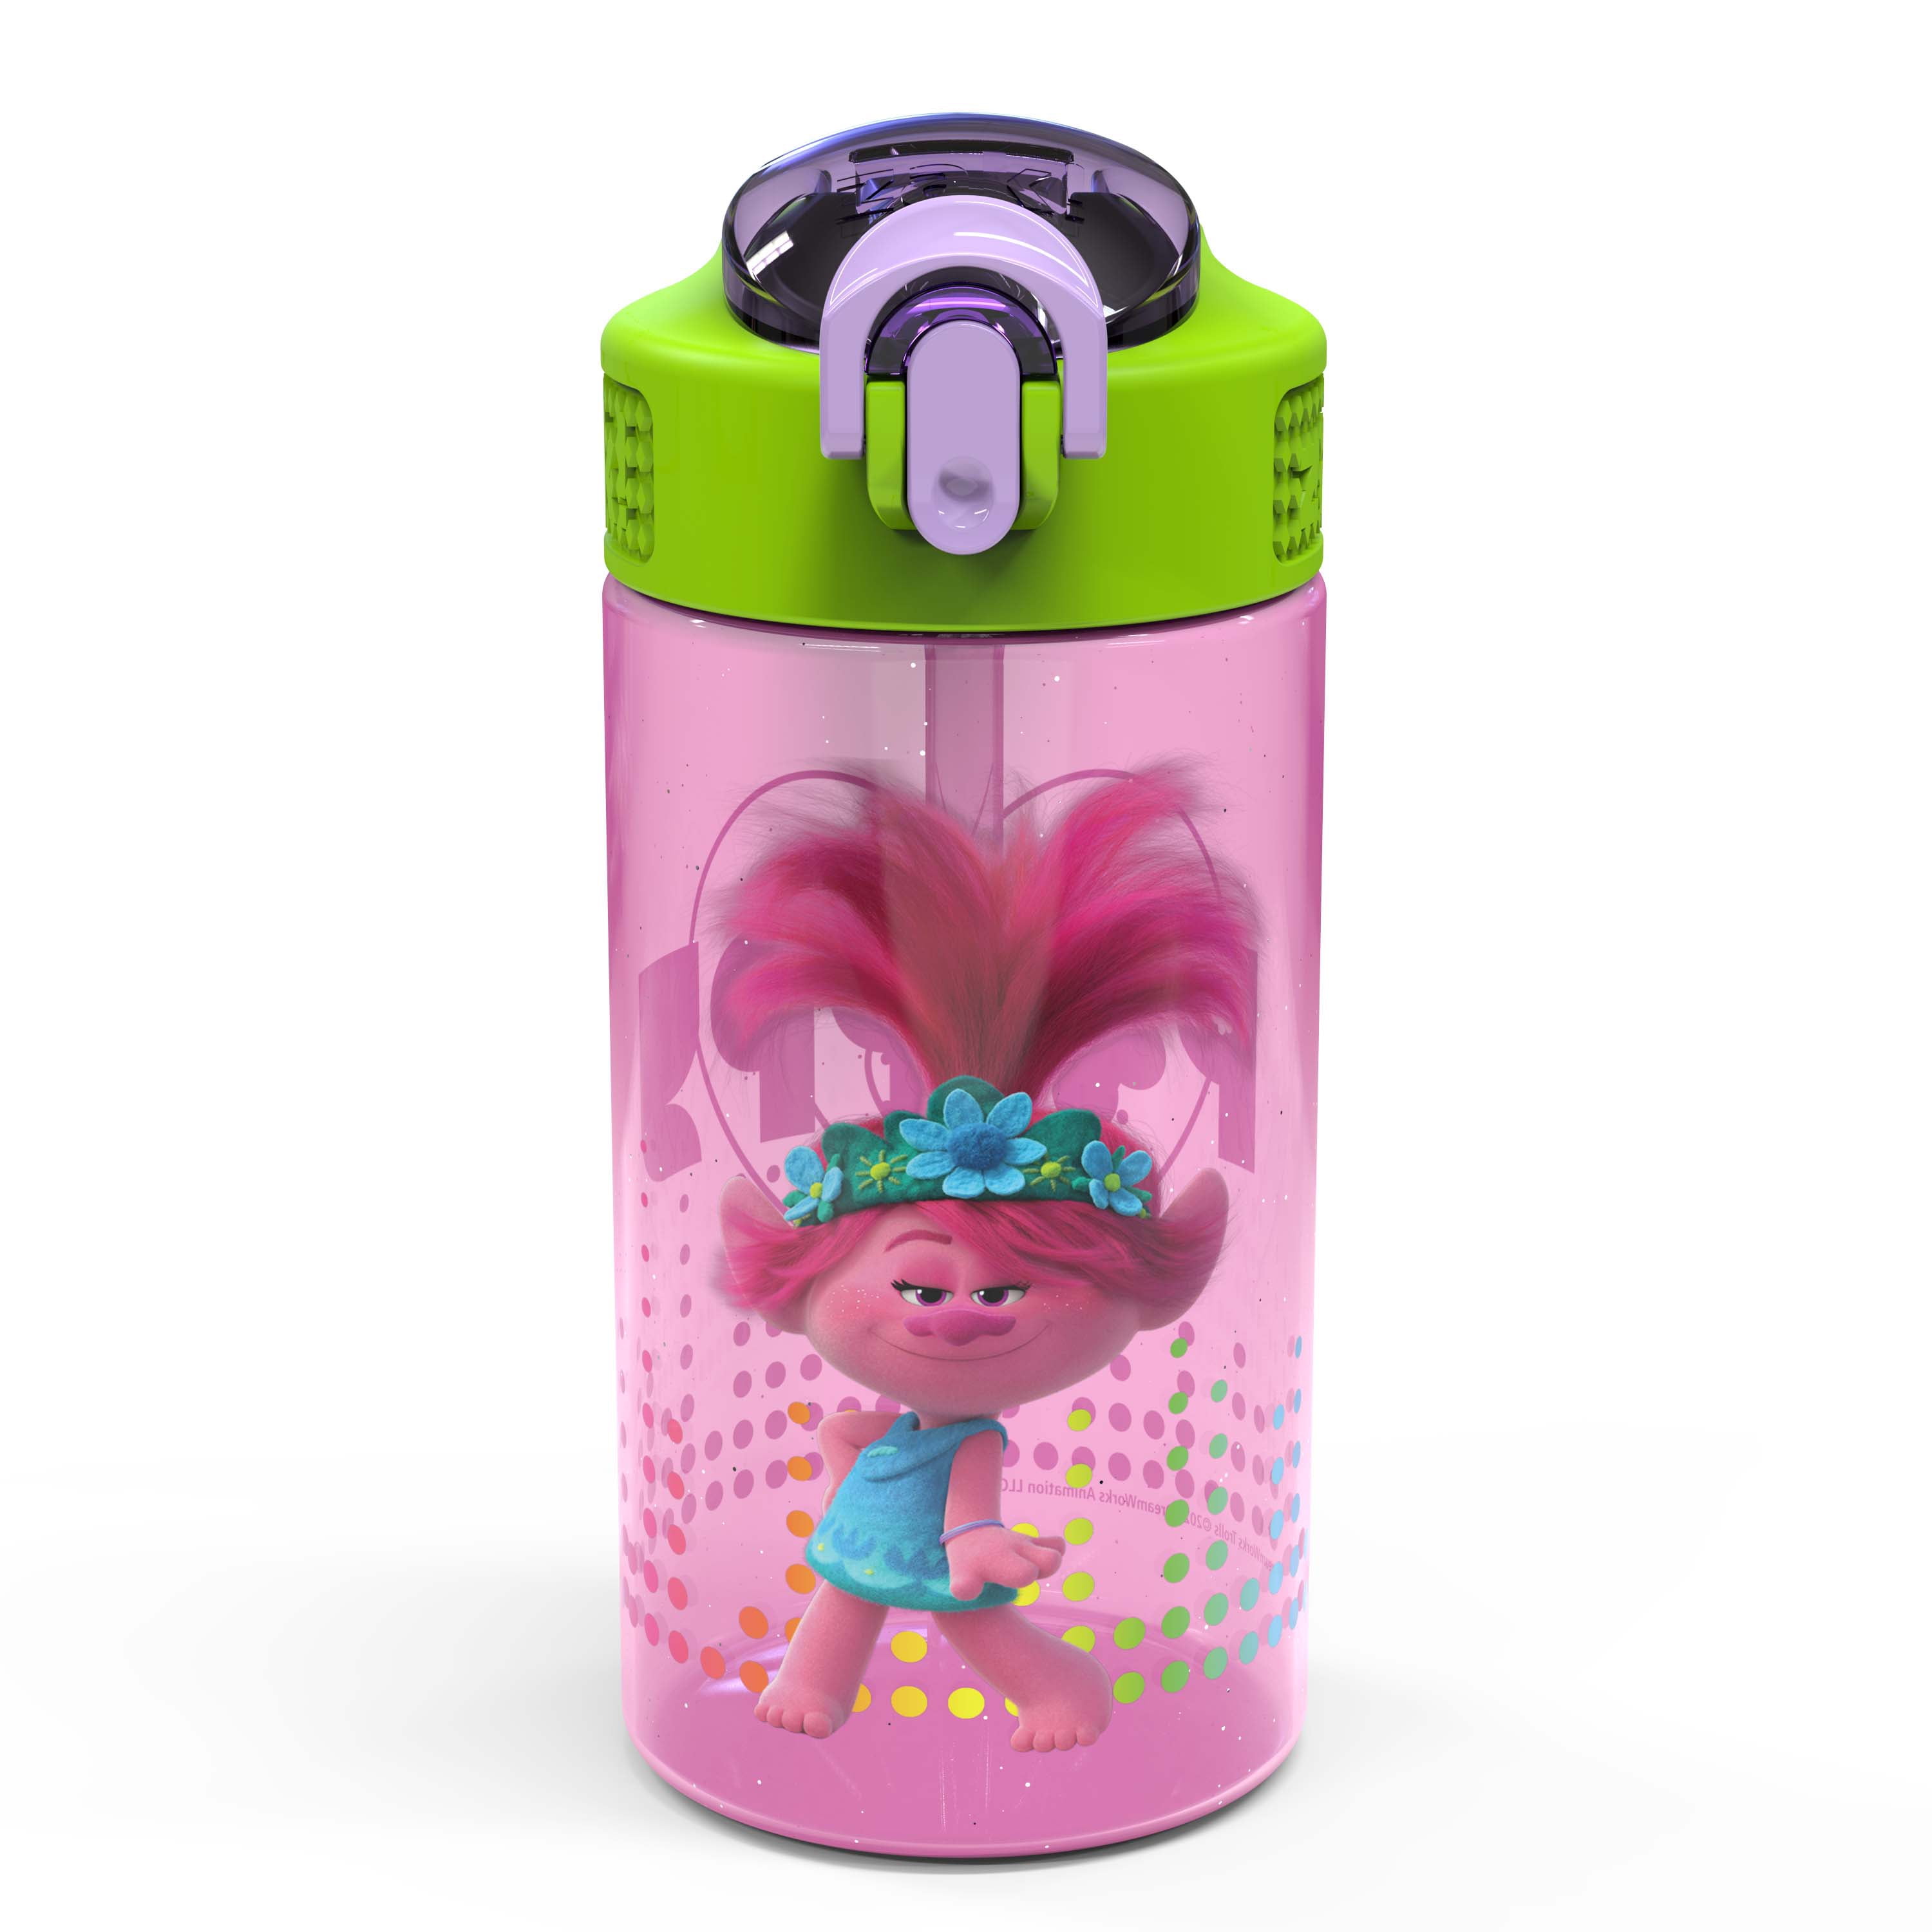 Trolls World Tour Water Bottle With Straw - Pink